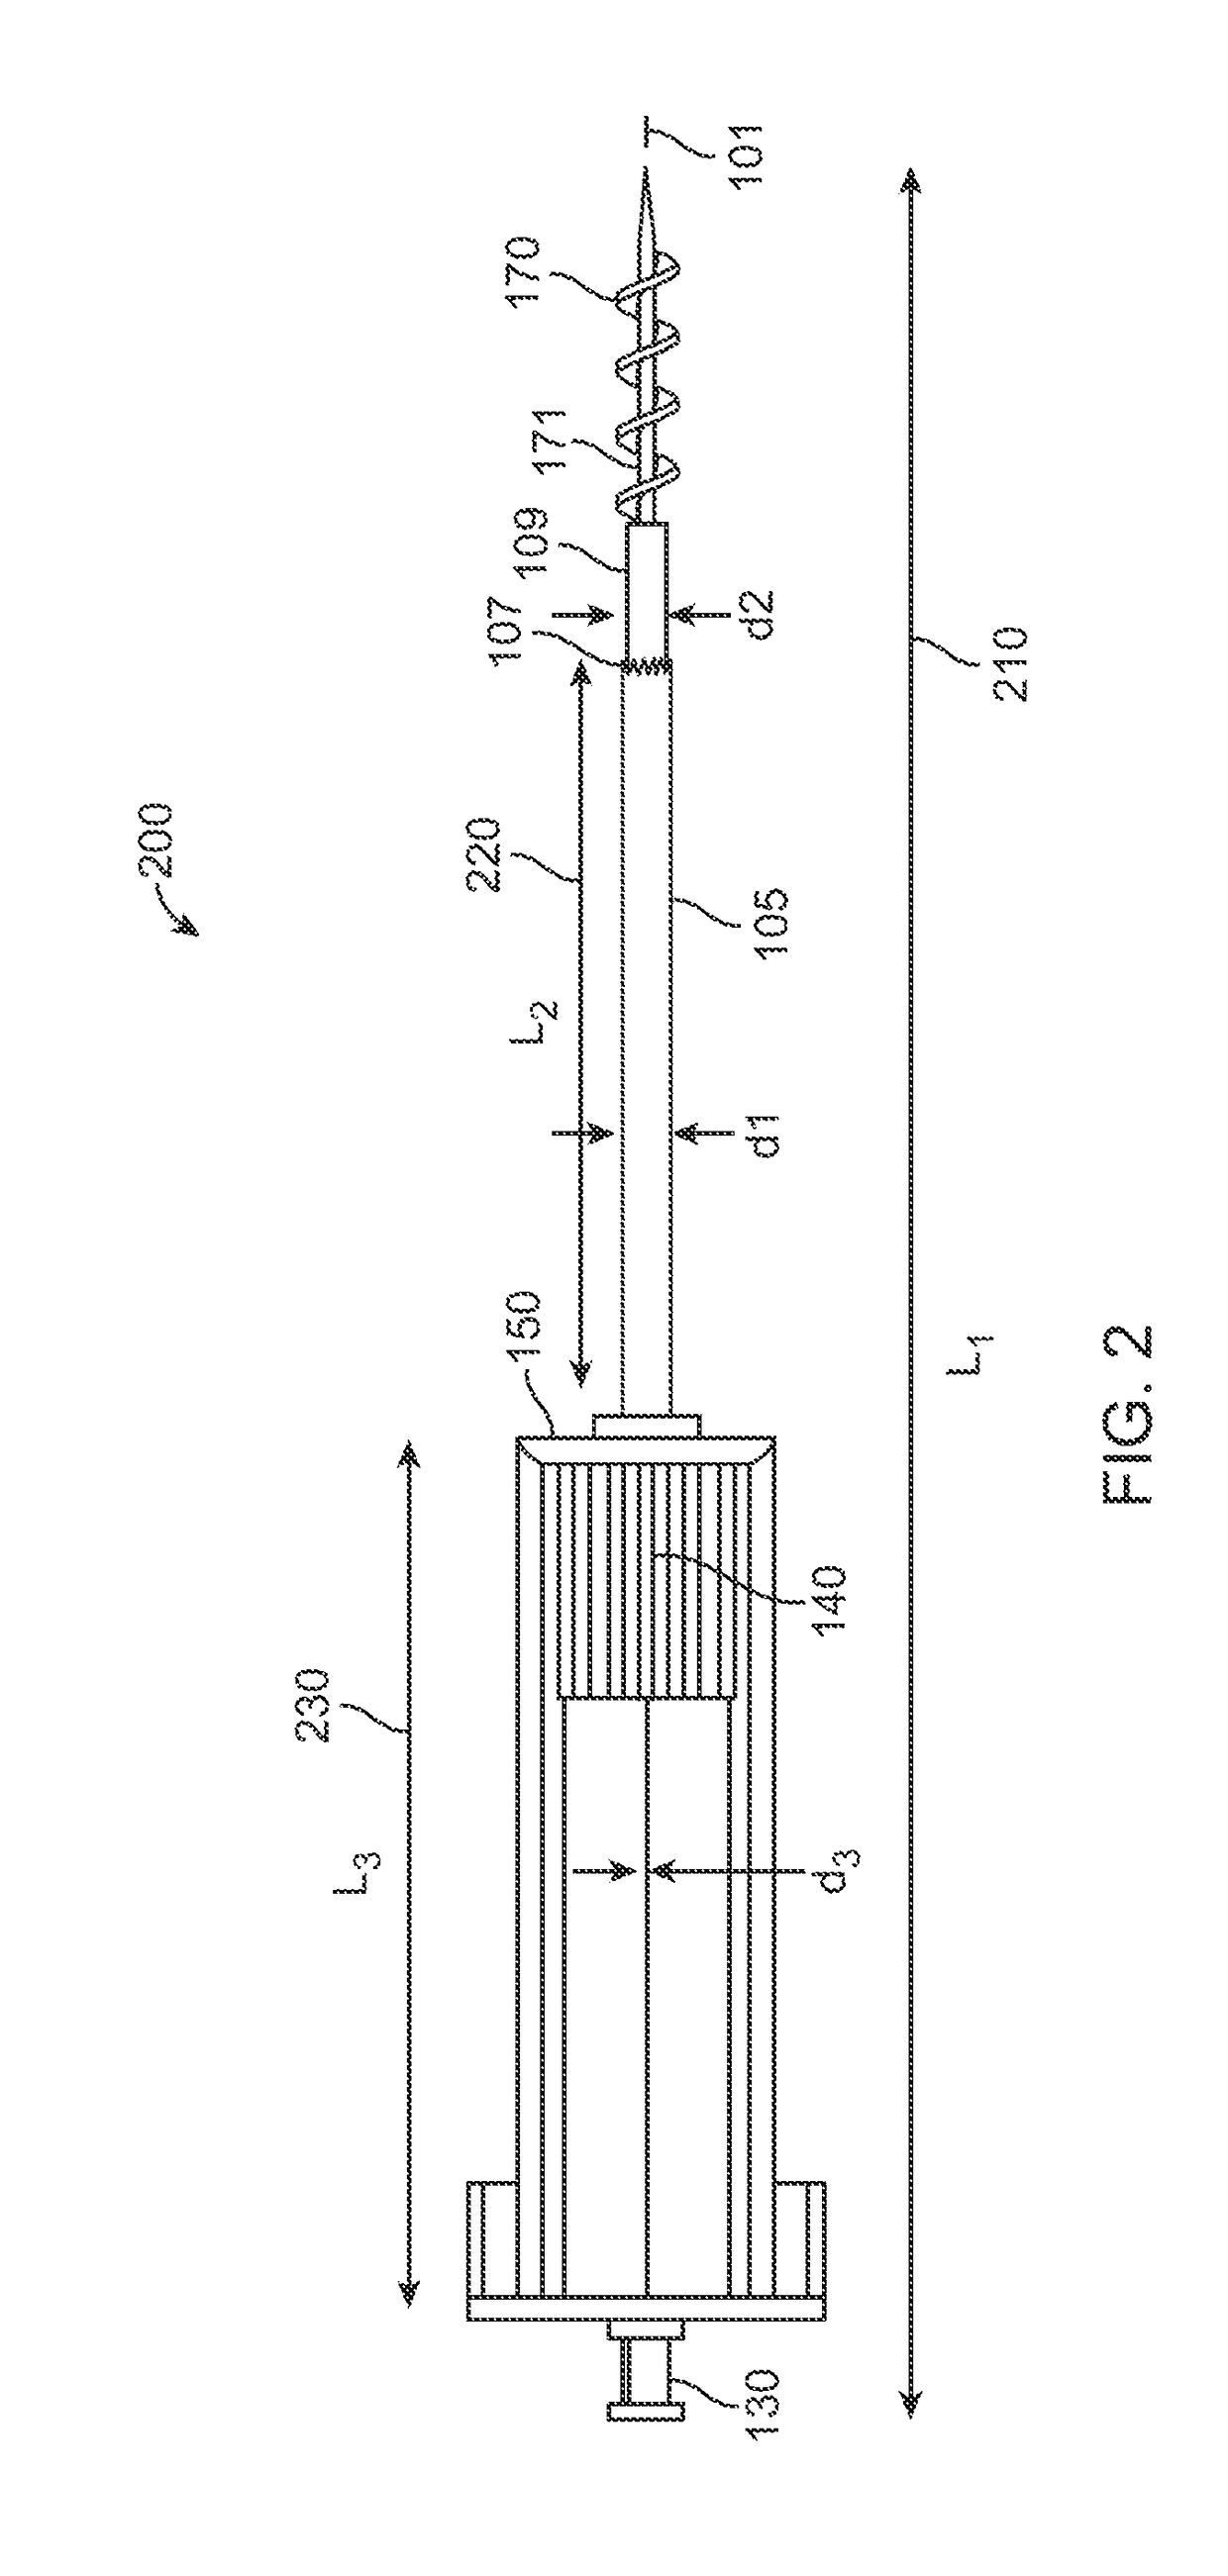 Apparatus and methods for tissue reduction